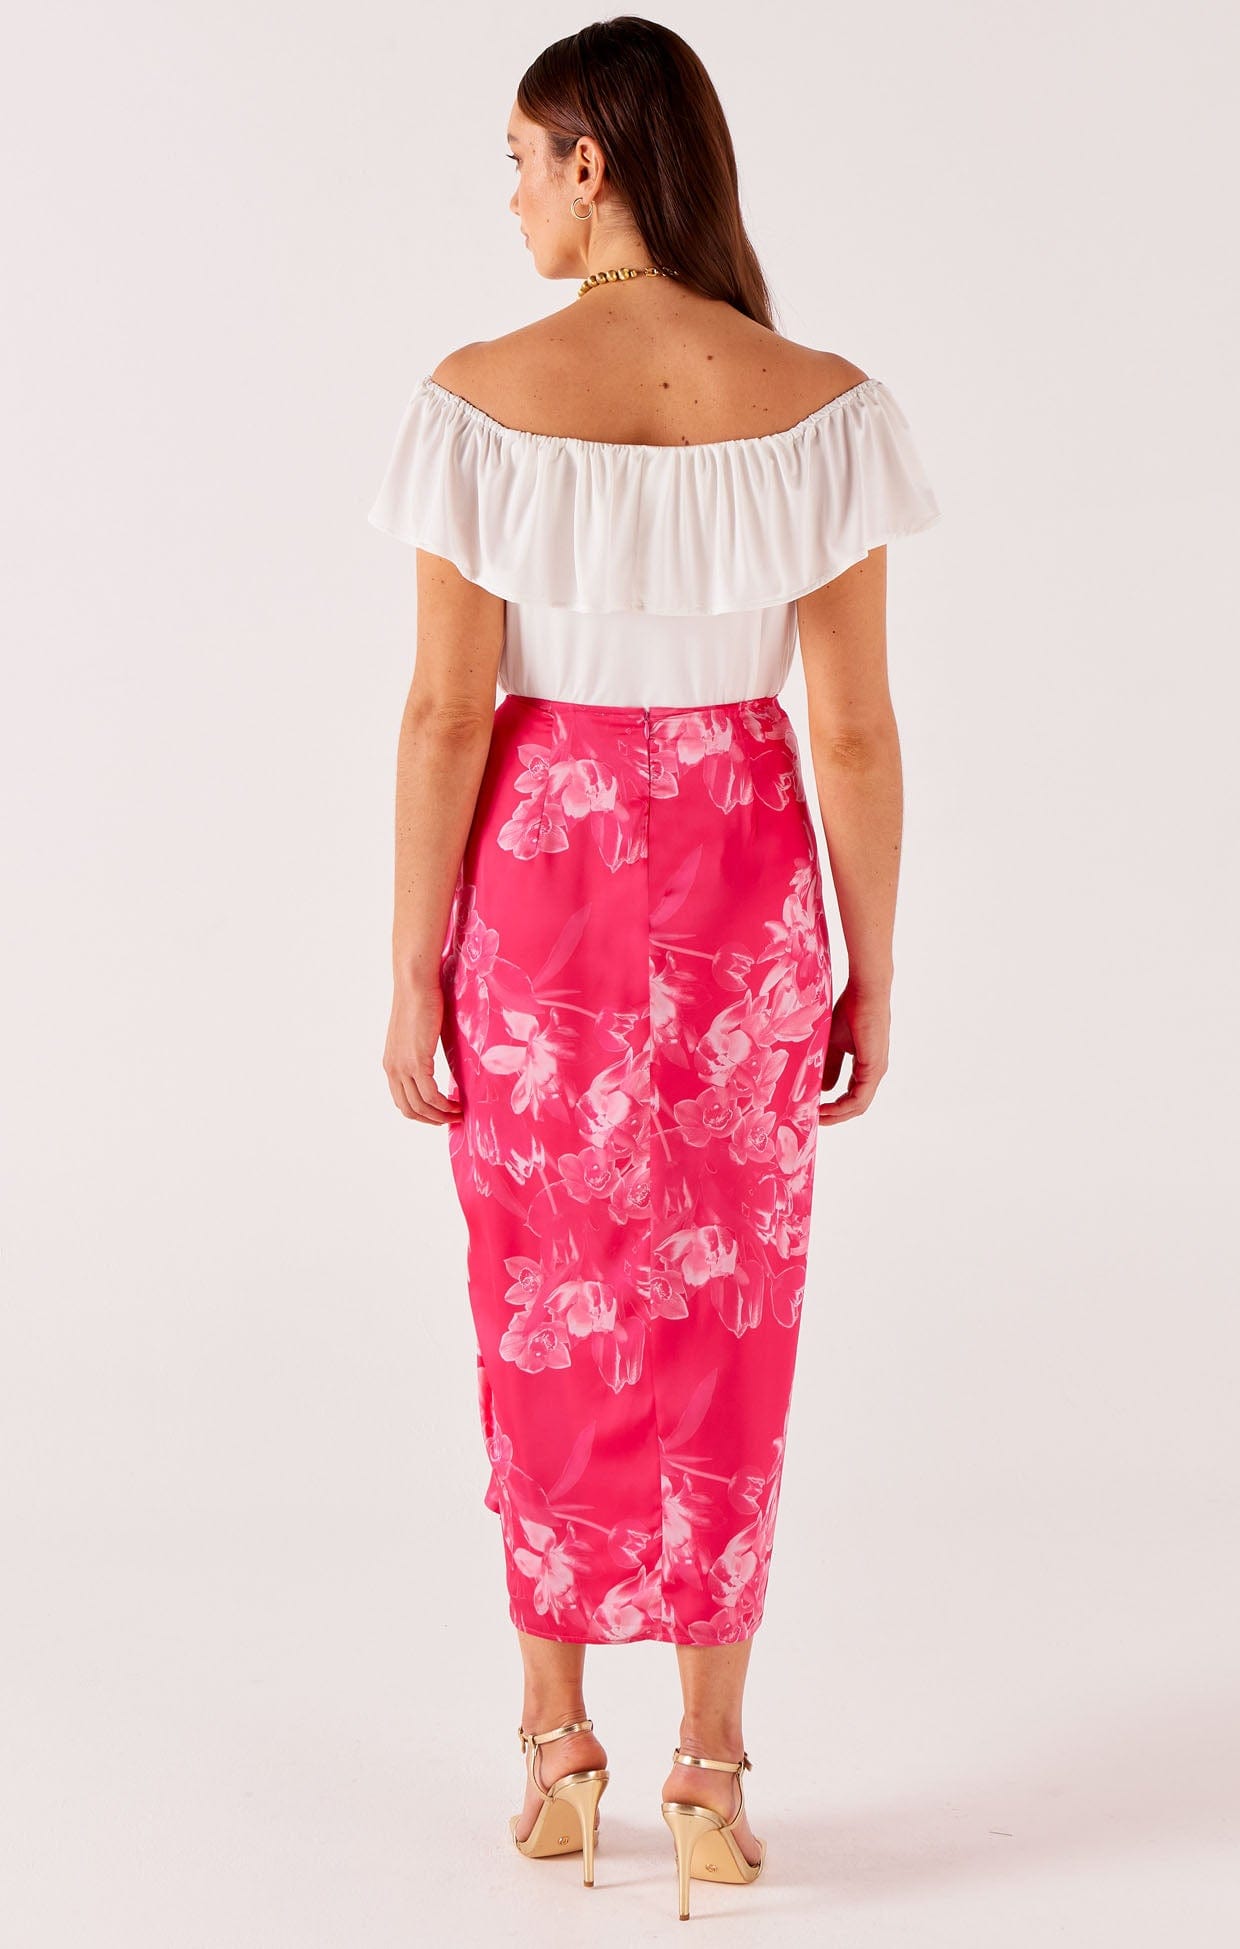 Skirts Events PINK ORCHID SKIRT IN HOT PINK FLORAL